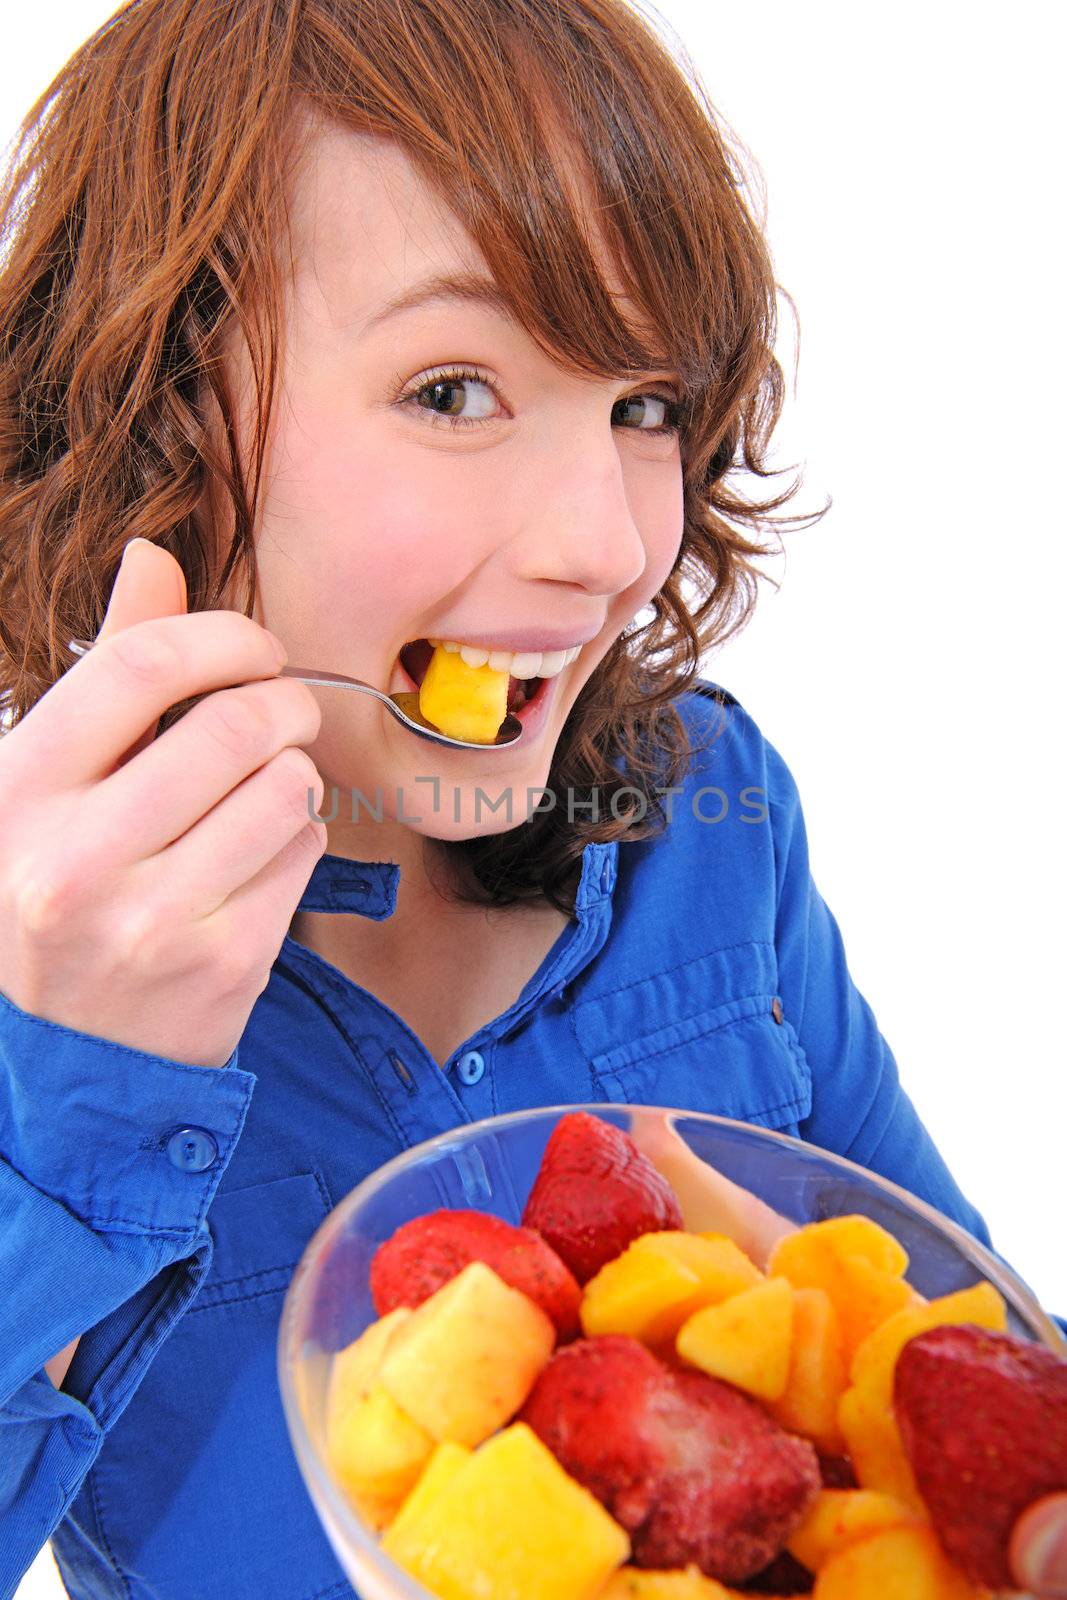 young woman eating fruit salad by mangostock